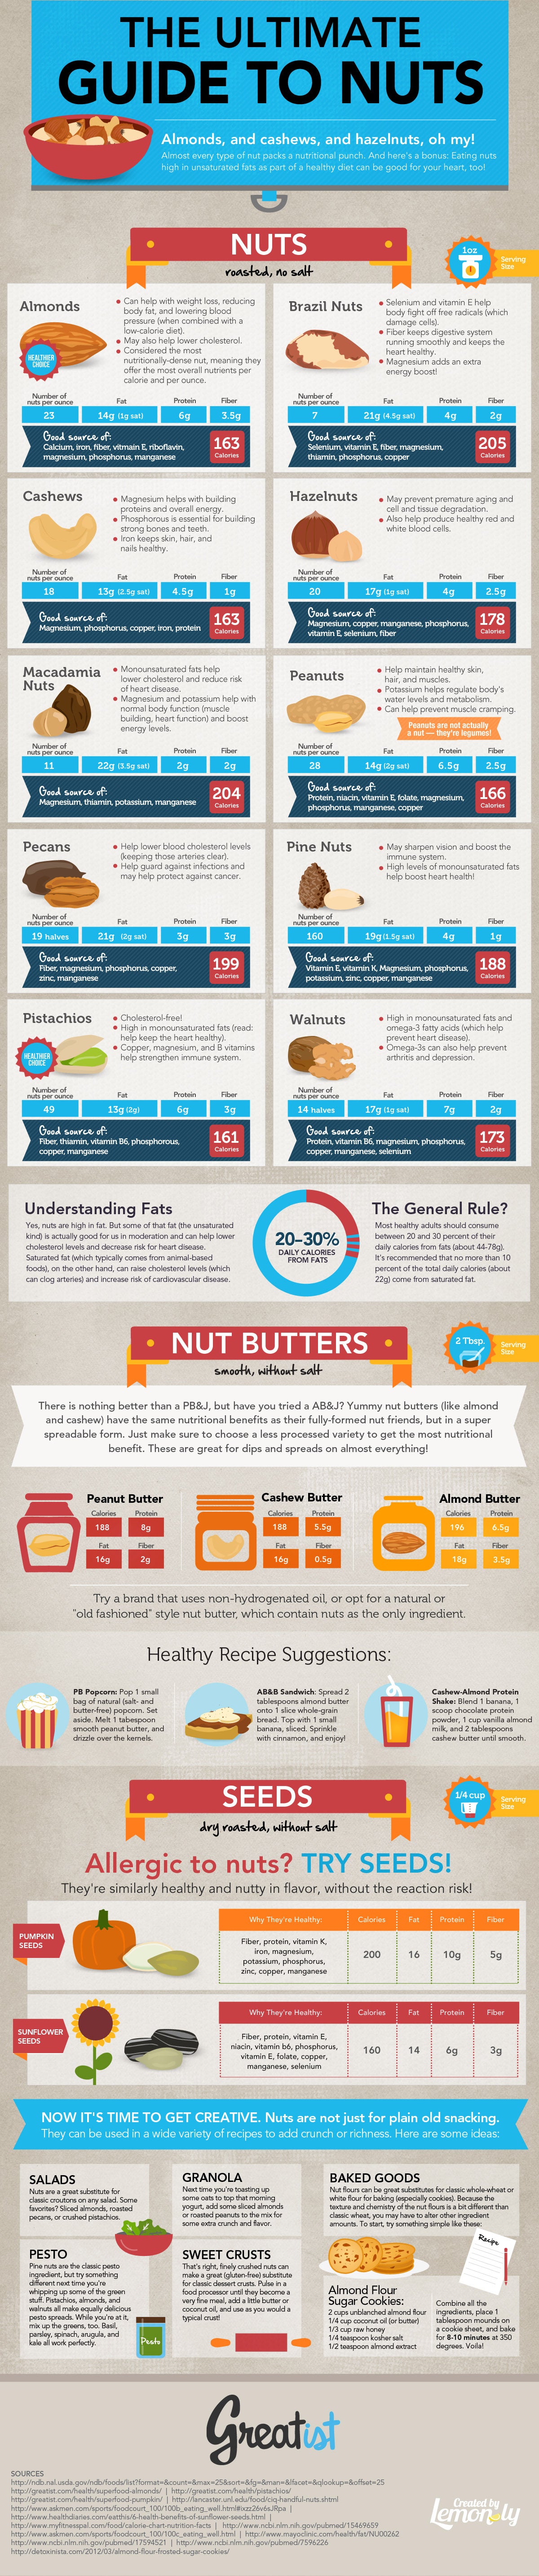 the ultimate guide to nuts